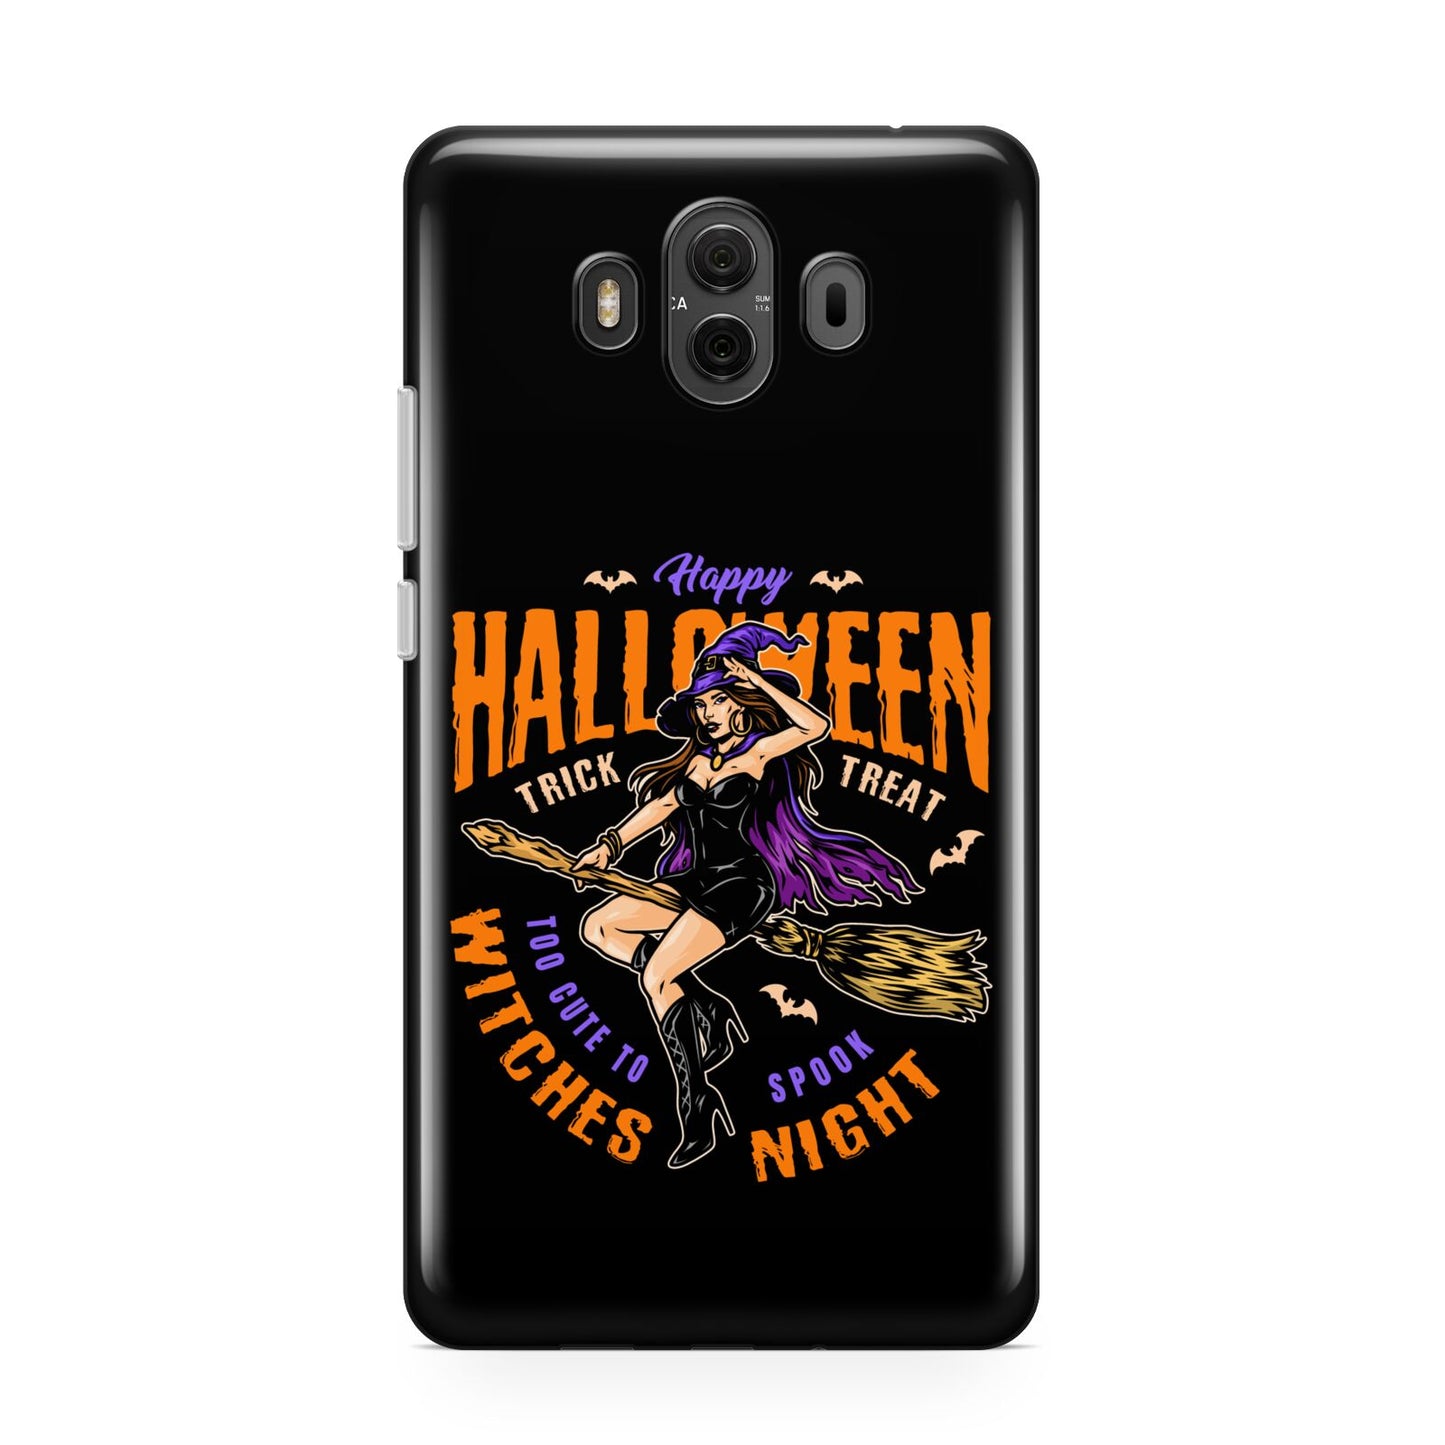 Witches Night Huawei Mate 10 Protective Phone Case